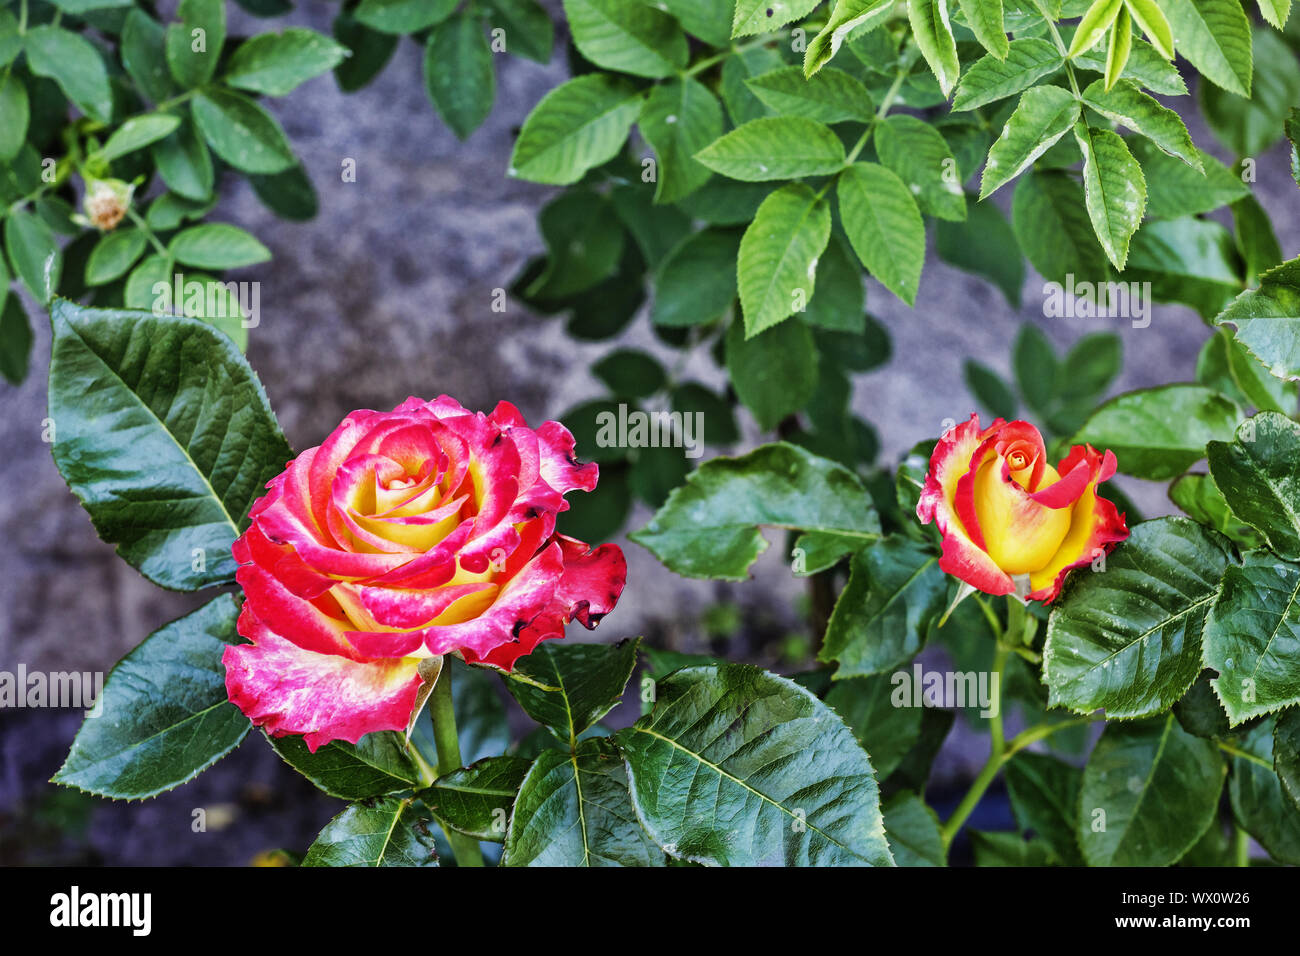 scarlet rose, Red, flowers, green garden, Flowering time, natural floral fence. Gardening, plants, l Stock Photo